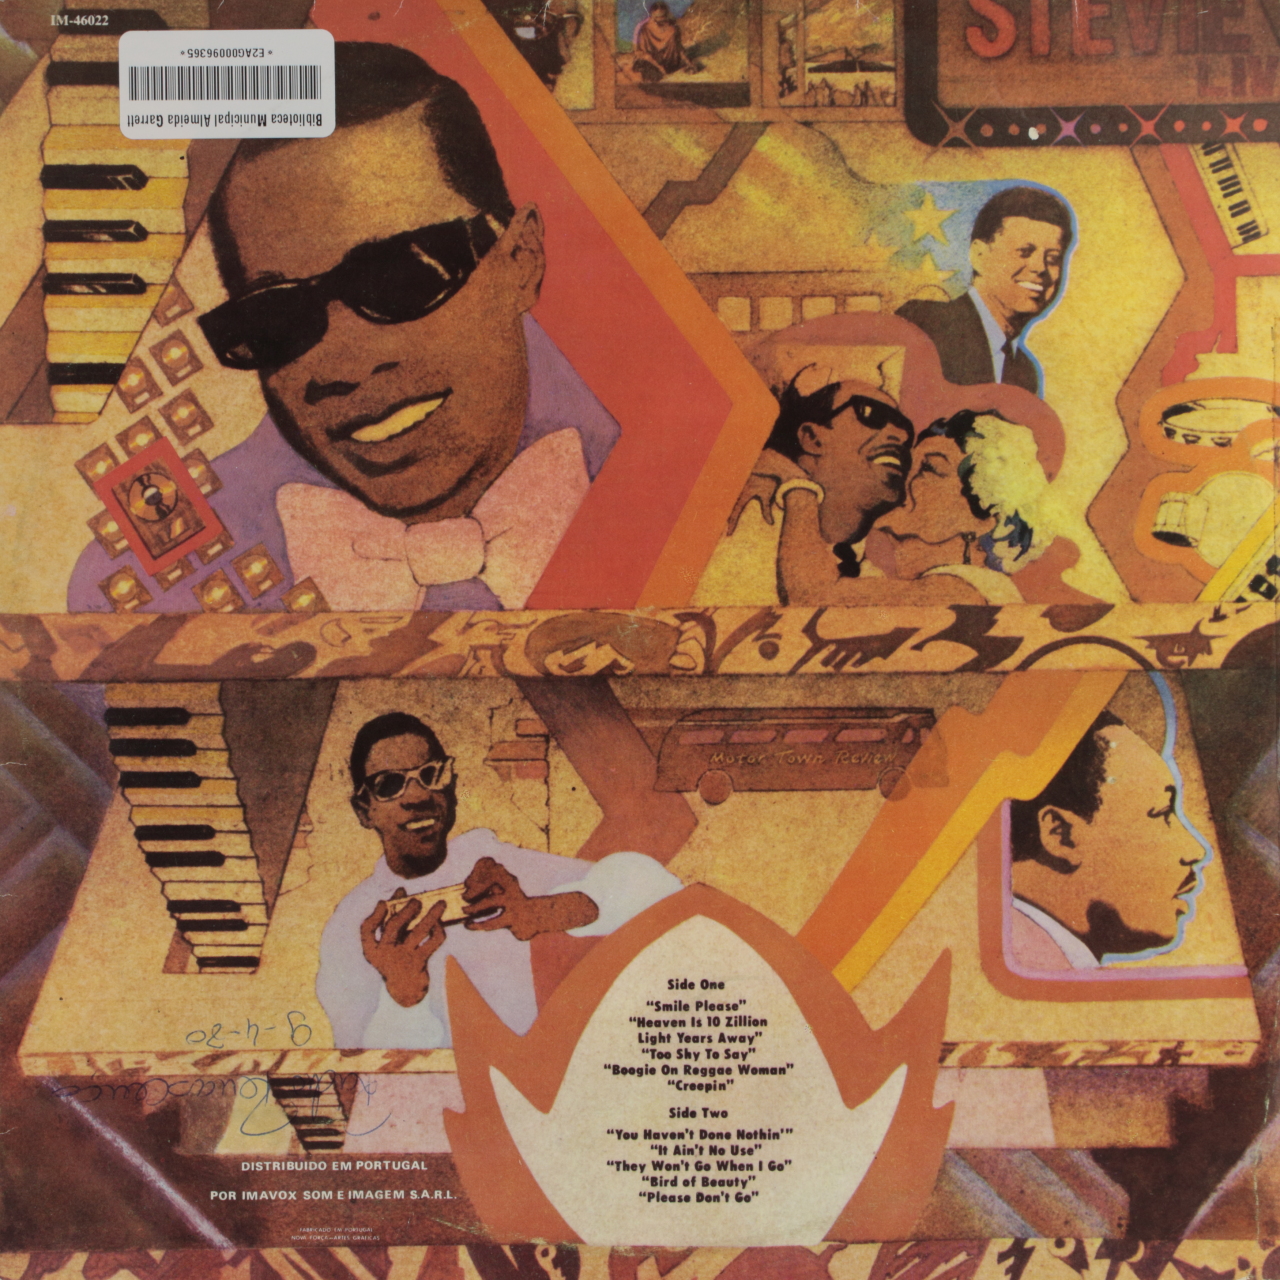 Fulfillingness First Finale